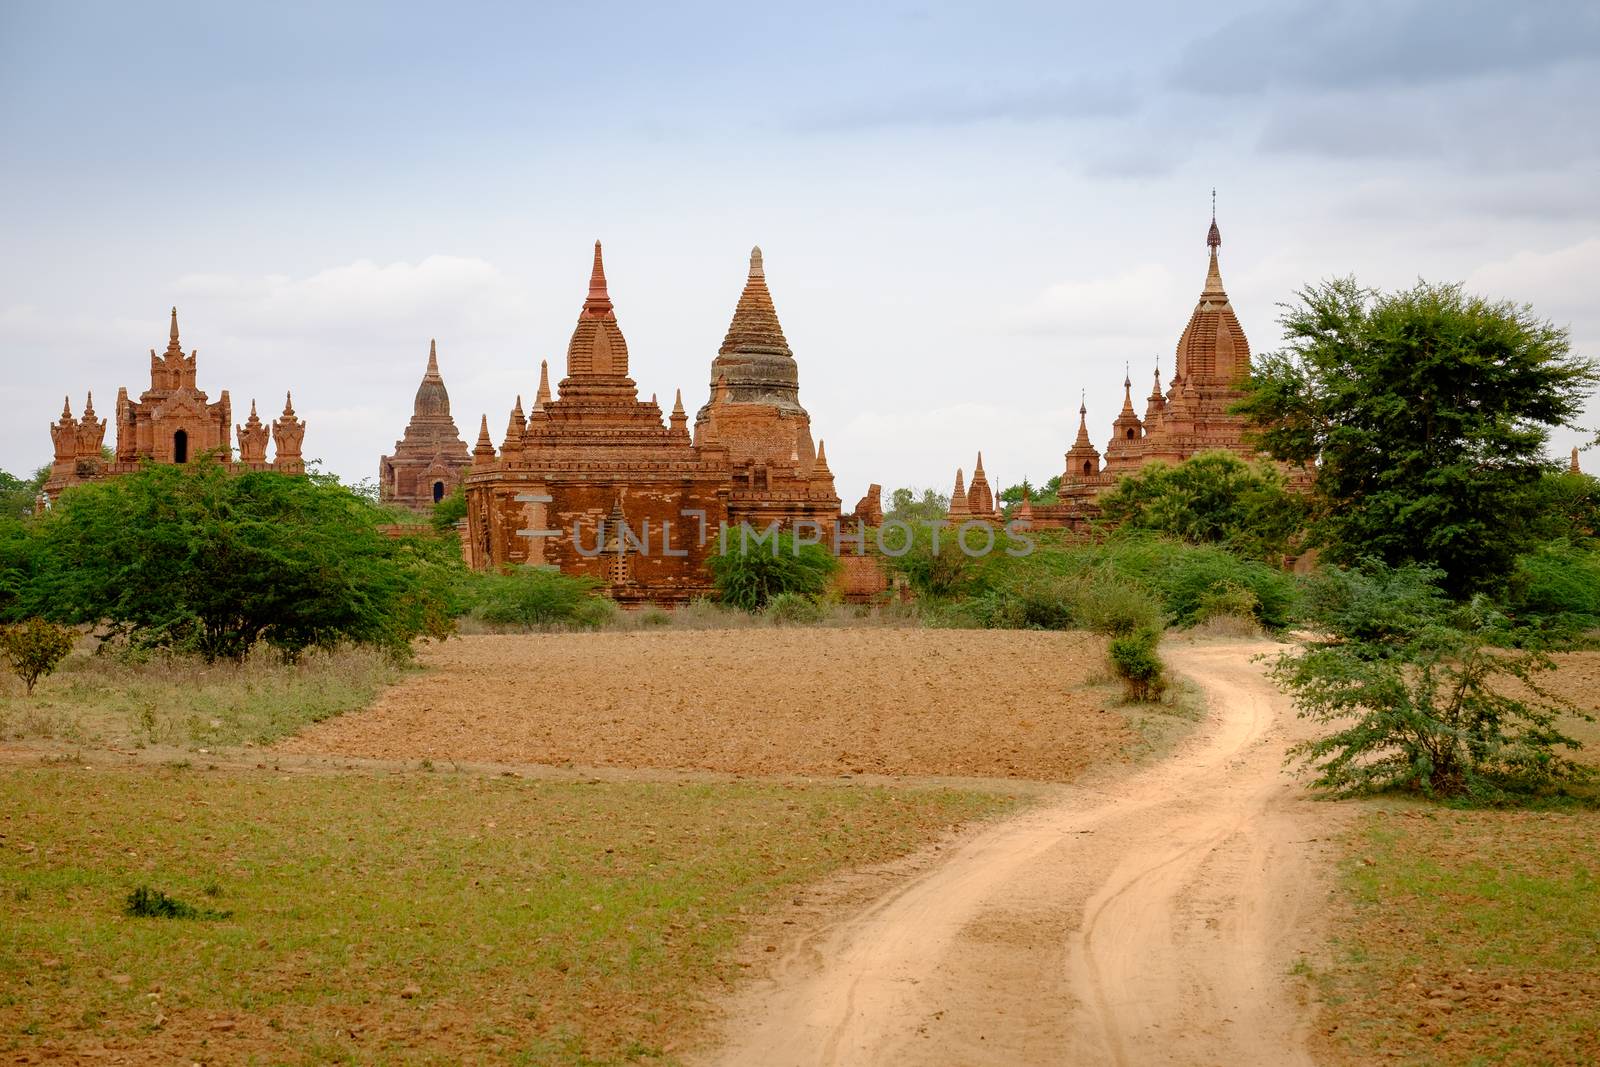 Landscape view of ancient temples and road in Old Bagan, Myanmar